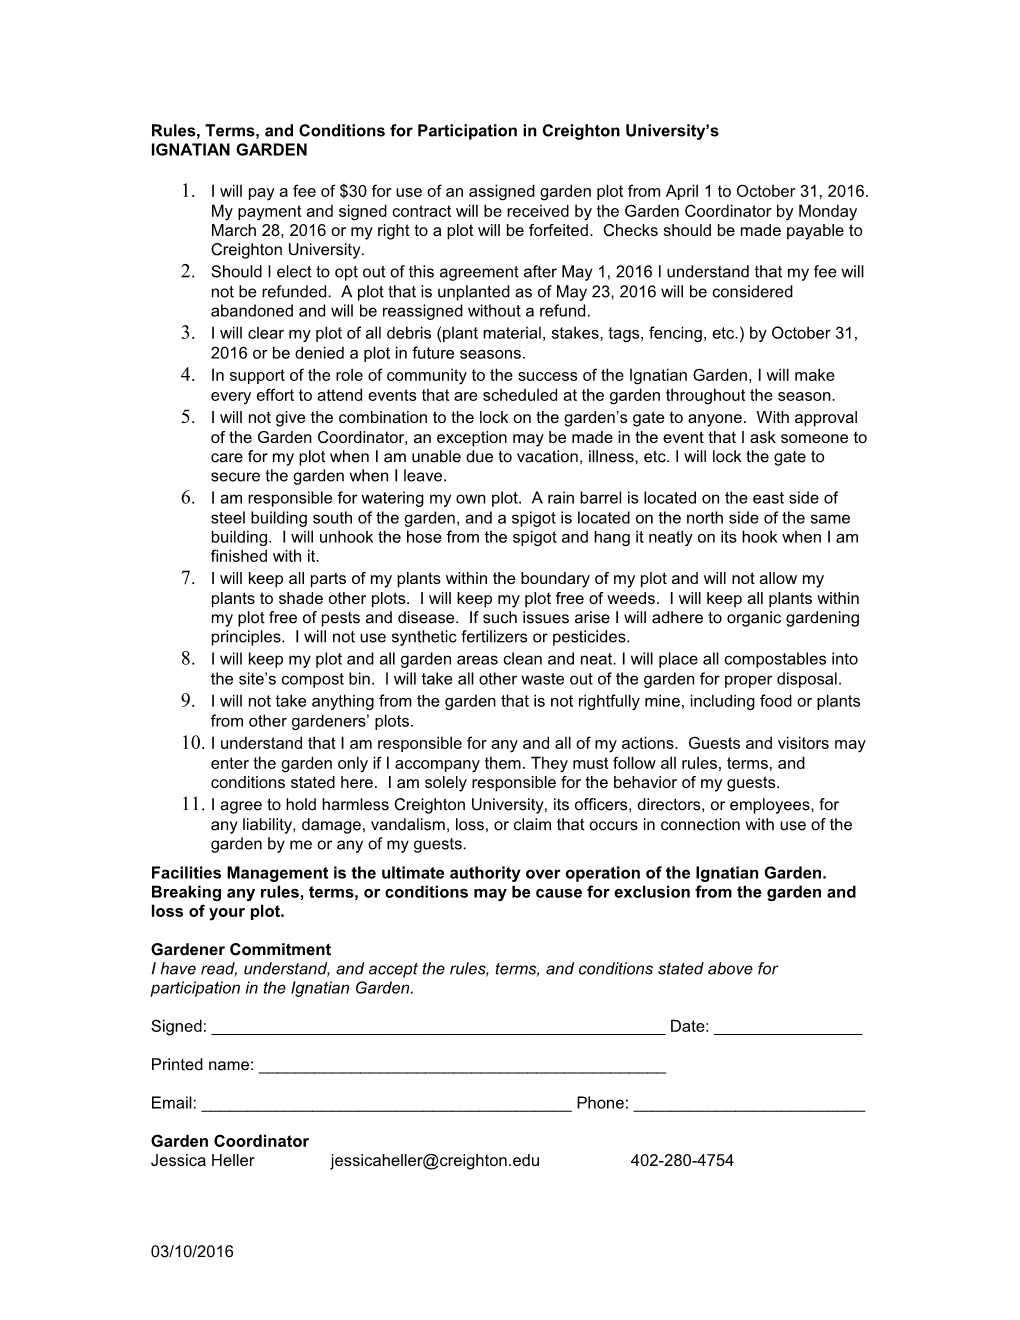 Rules, Terms, and Conditions for Participation in Creighton University S s1